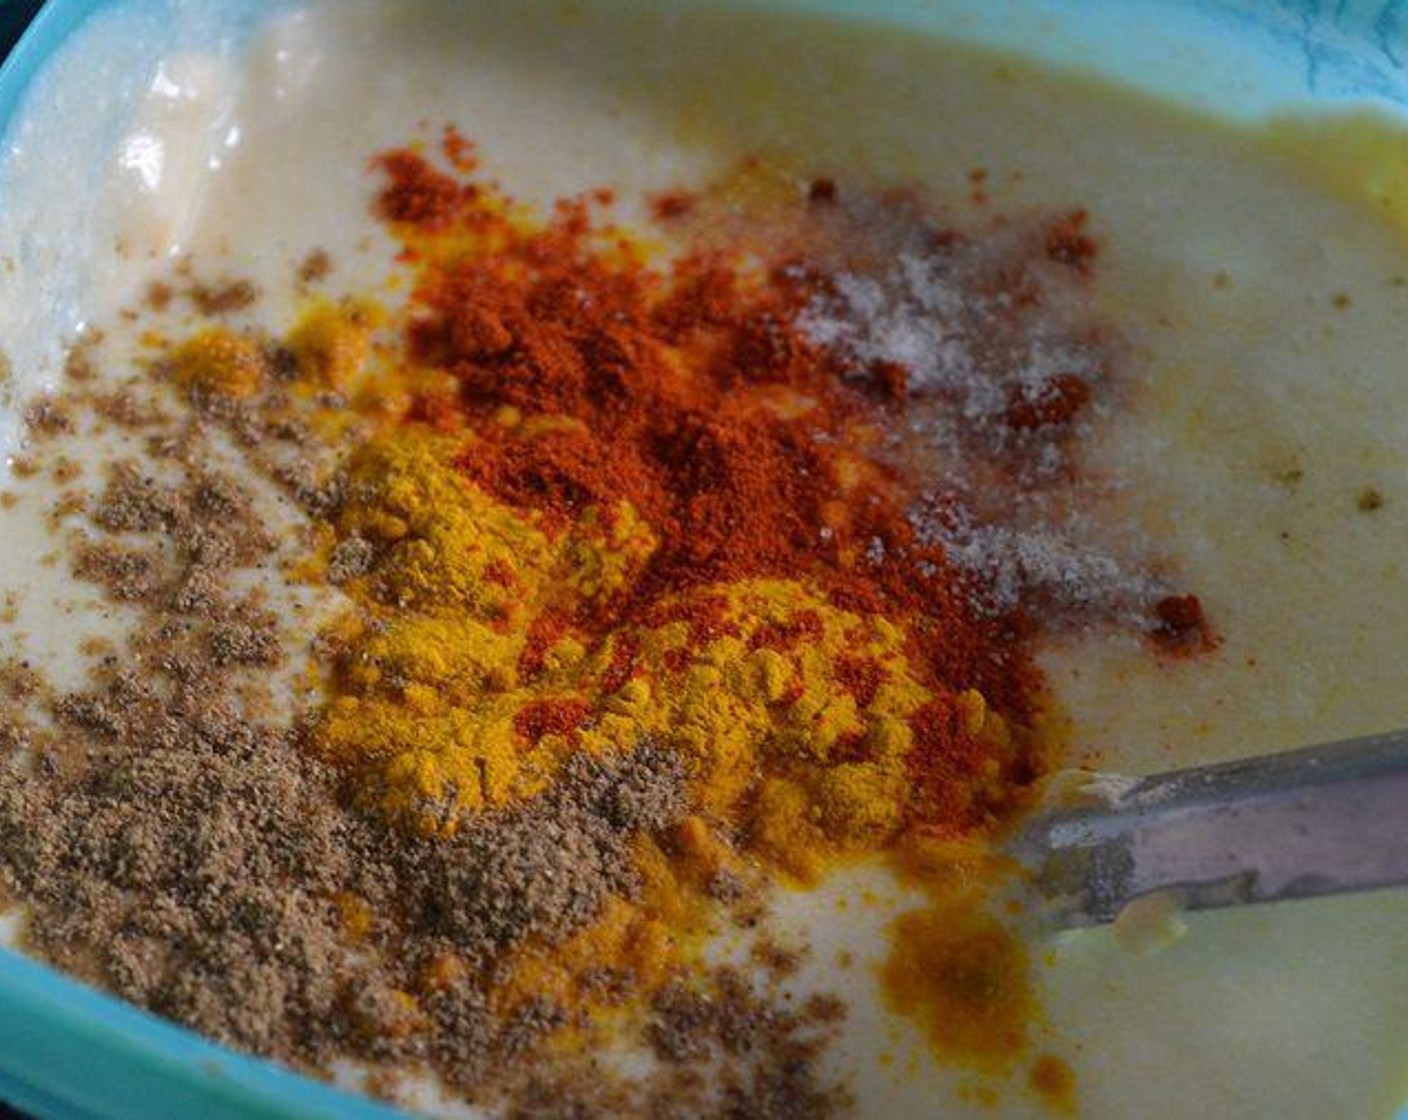 step 6 For the yogurt curry batter: In a big bowl, take the Buttermilk (2 cups), whip it with spatula well to make it smooth and add Chickpea Flour (1 cup). Add Ground Turmeric (1 1/2 Tbsp), Red Chili Powder (1 Tbsp), Garam Masala (1 Tbsp) and Salt (to taste). Add Water (to taste), mix well, make sure there are no lumps. Can you see the flour lump that means i have to dissolve the lumps well. Use a spoon to dissolve the lumps into the curd.